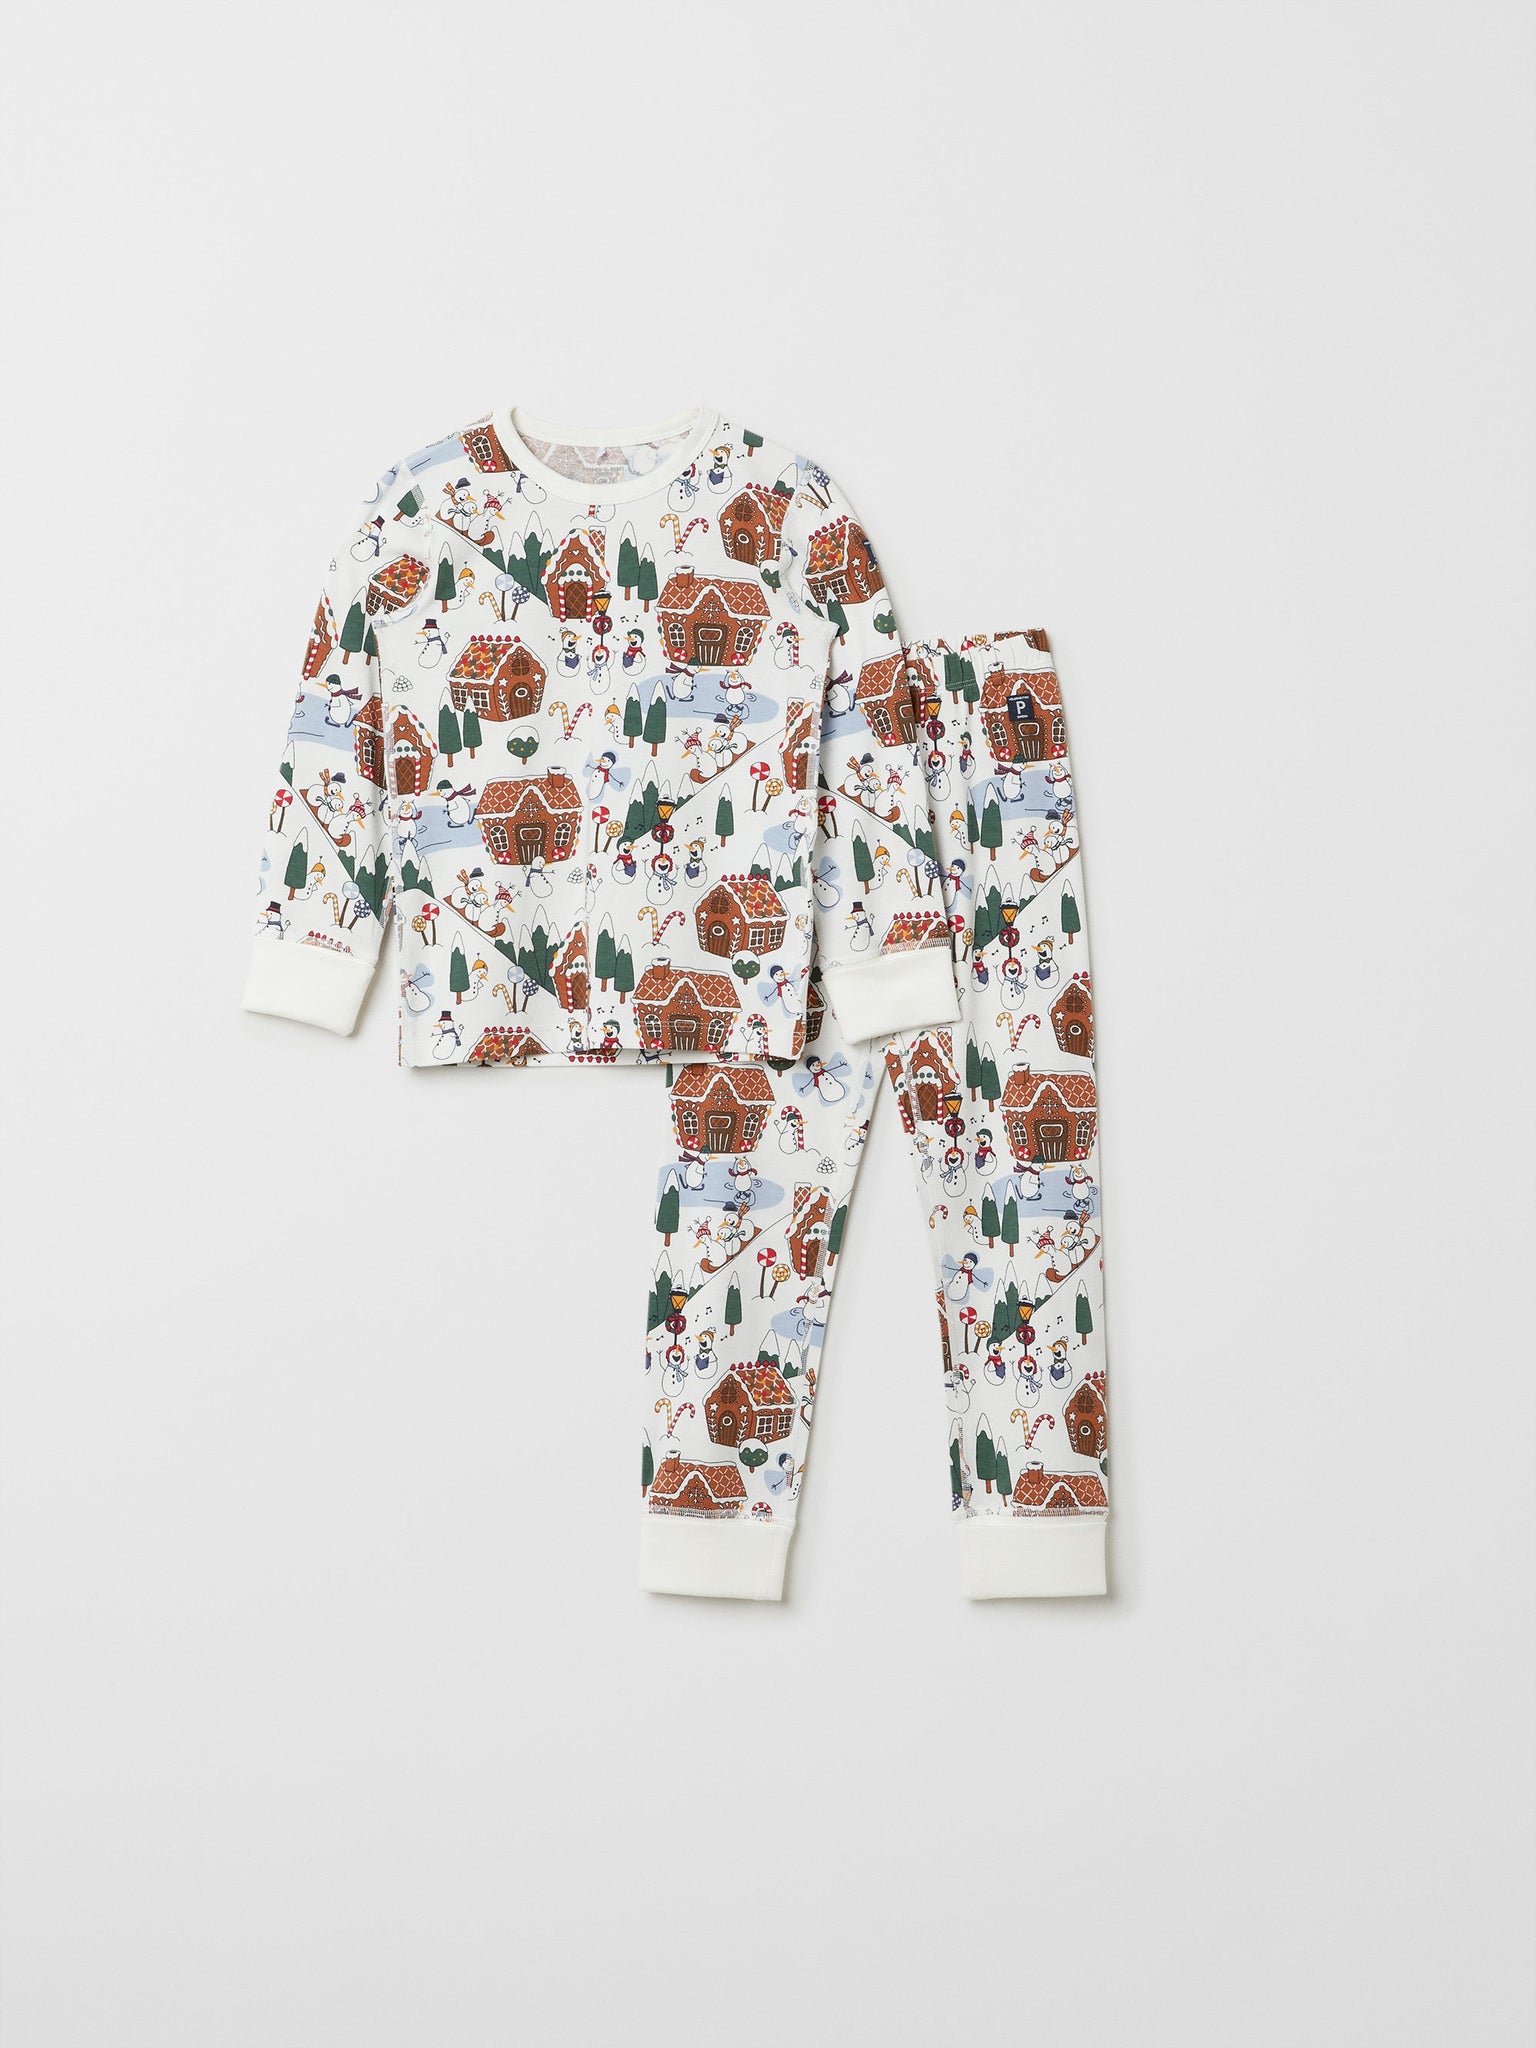 White Organic Kids Christmas Pyjamas from the Polarn O. Pyret kidswear collection. Ethically produced kids clothing.